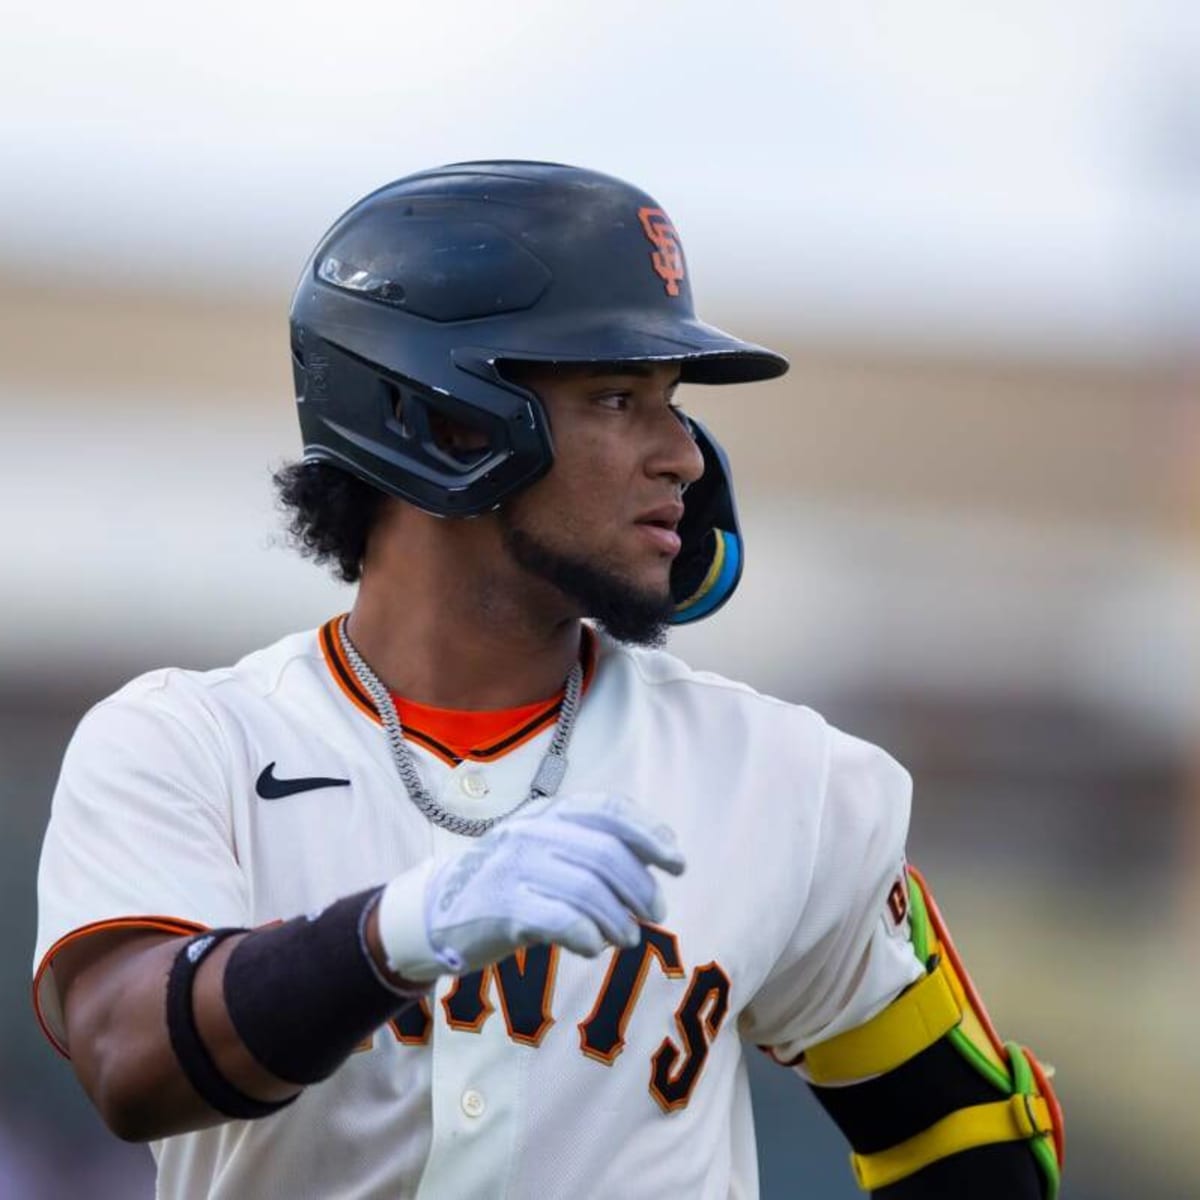 The Giants top position player prospect, Marco Luciano, has been